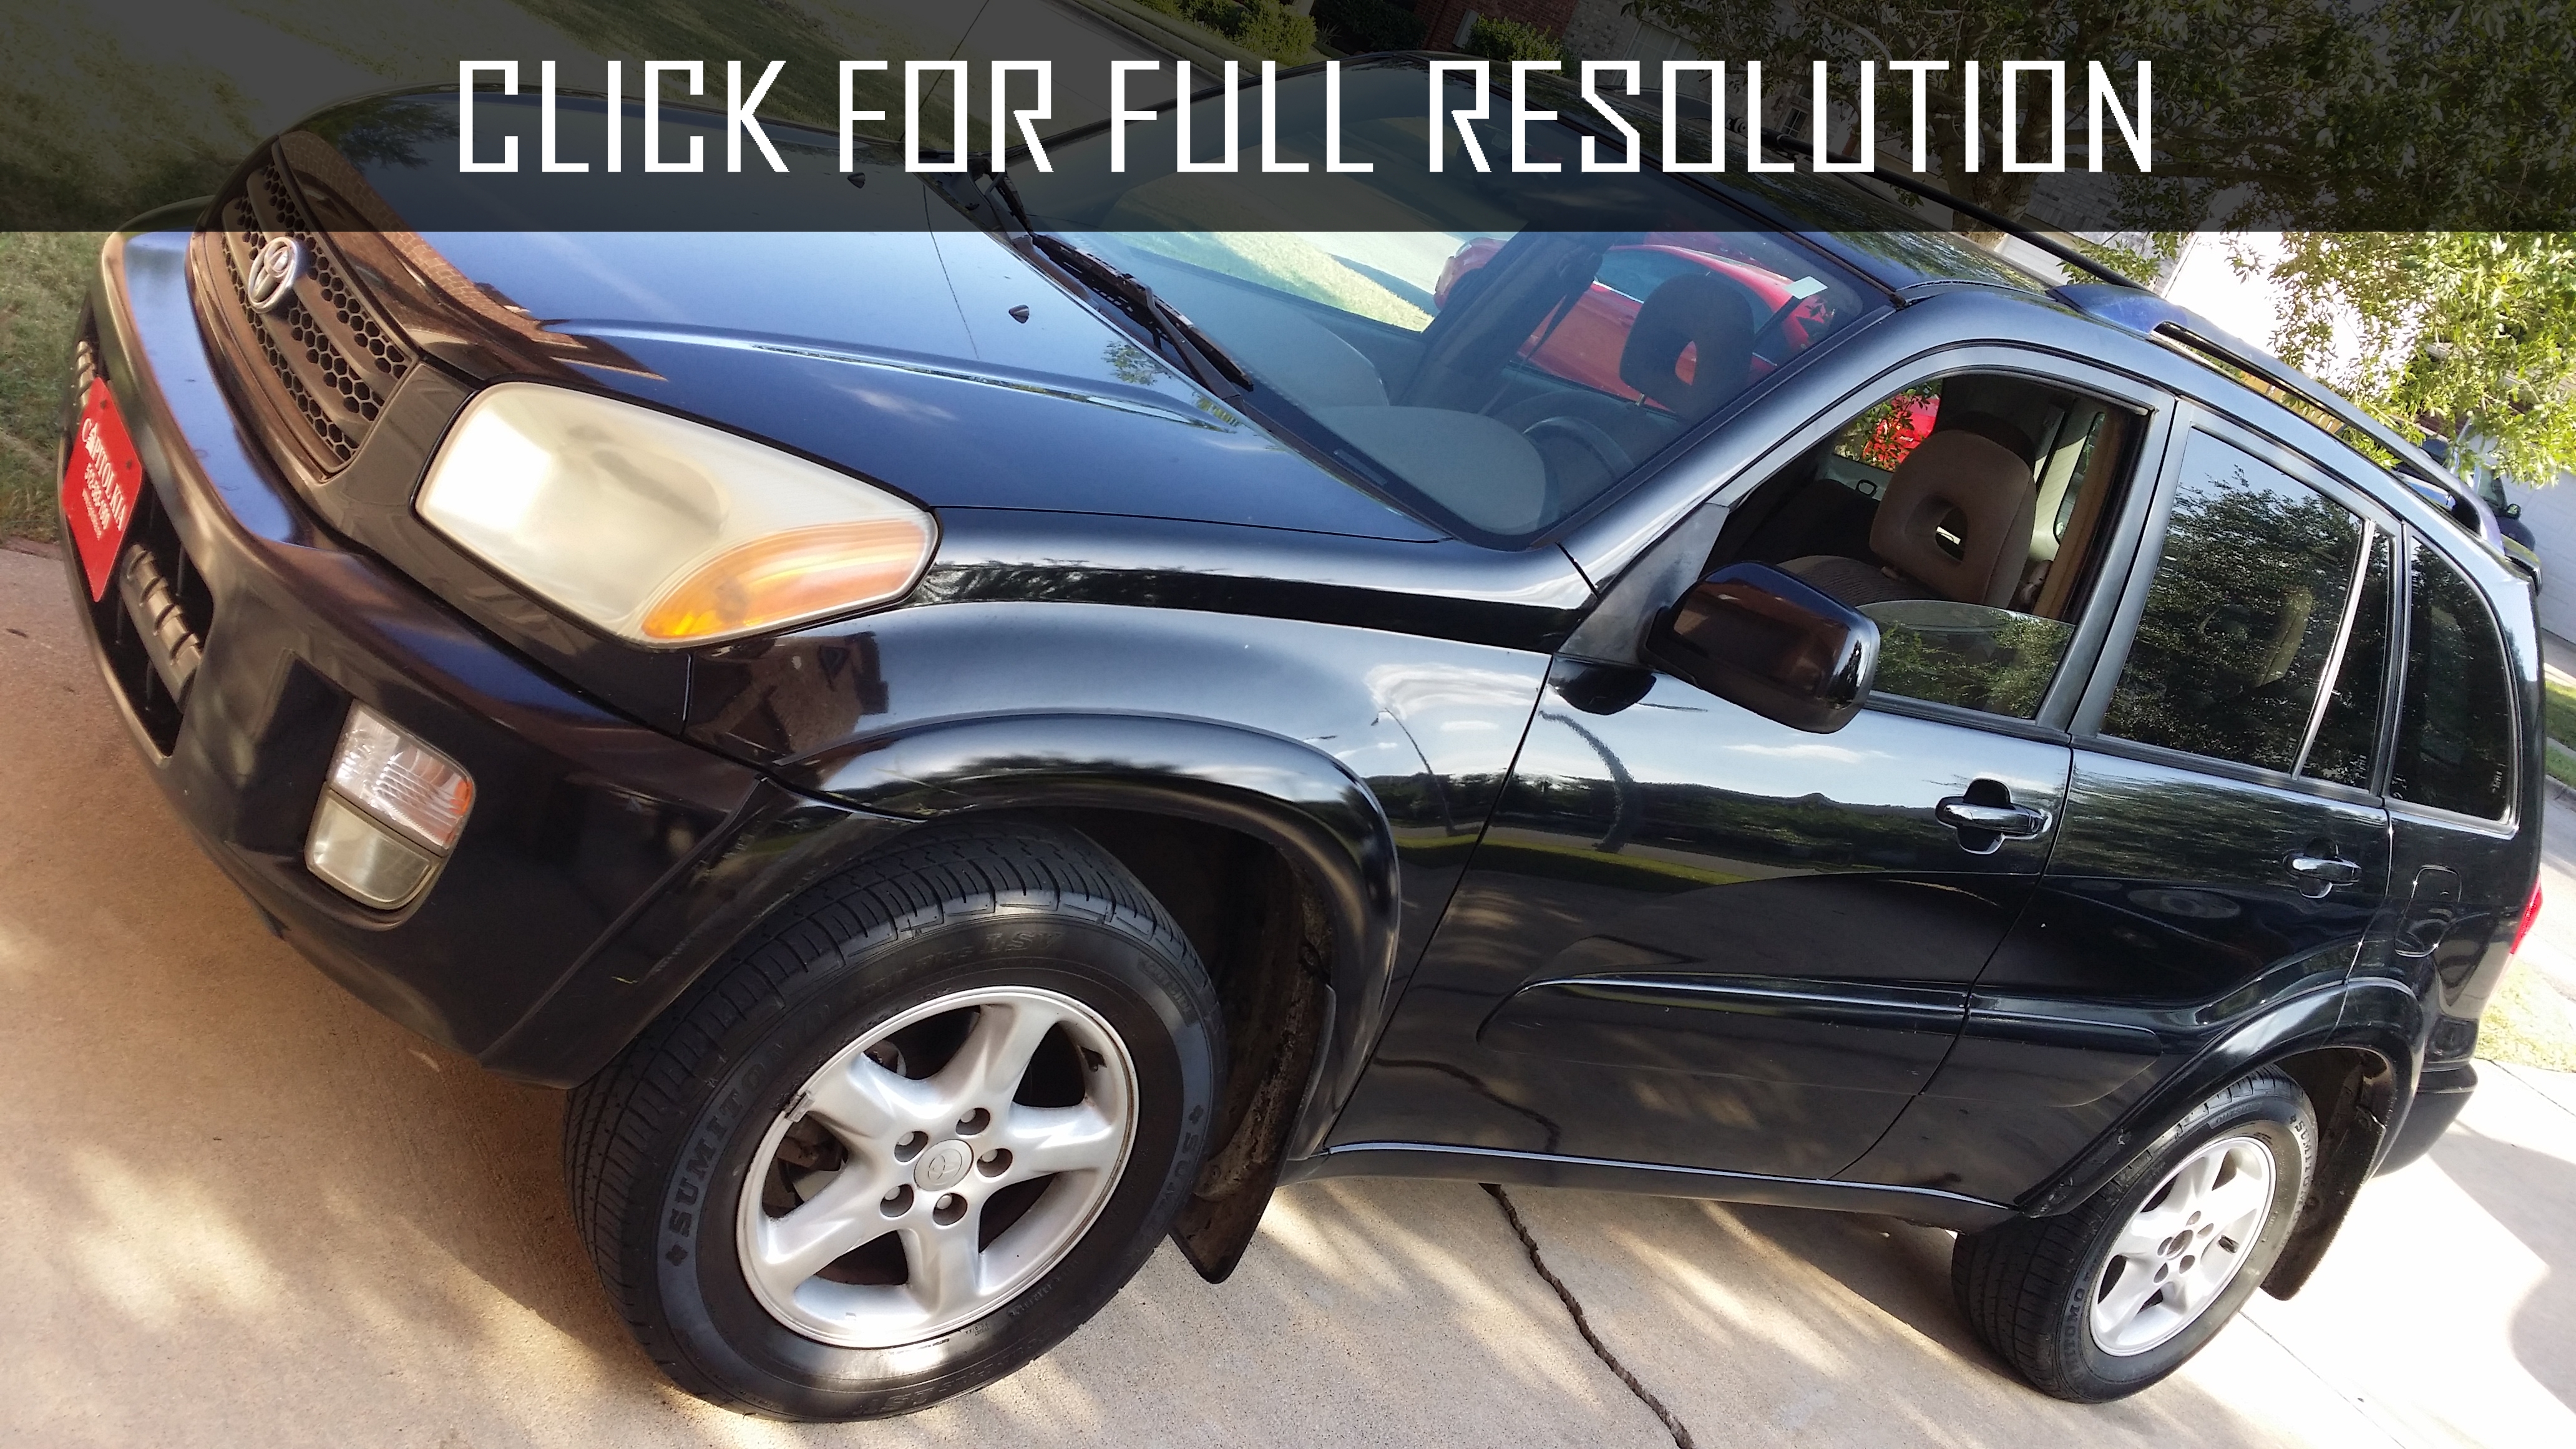 2002 Toyota Rav4 Sport news, reviews, msrp, ratings with